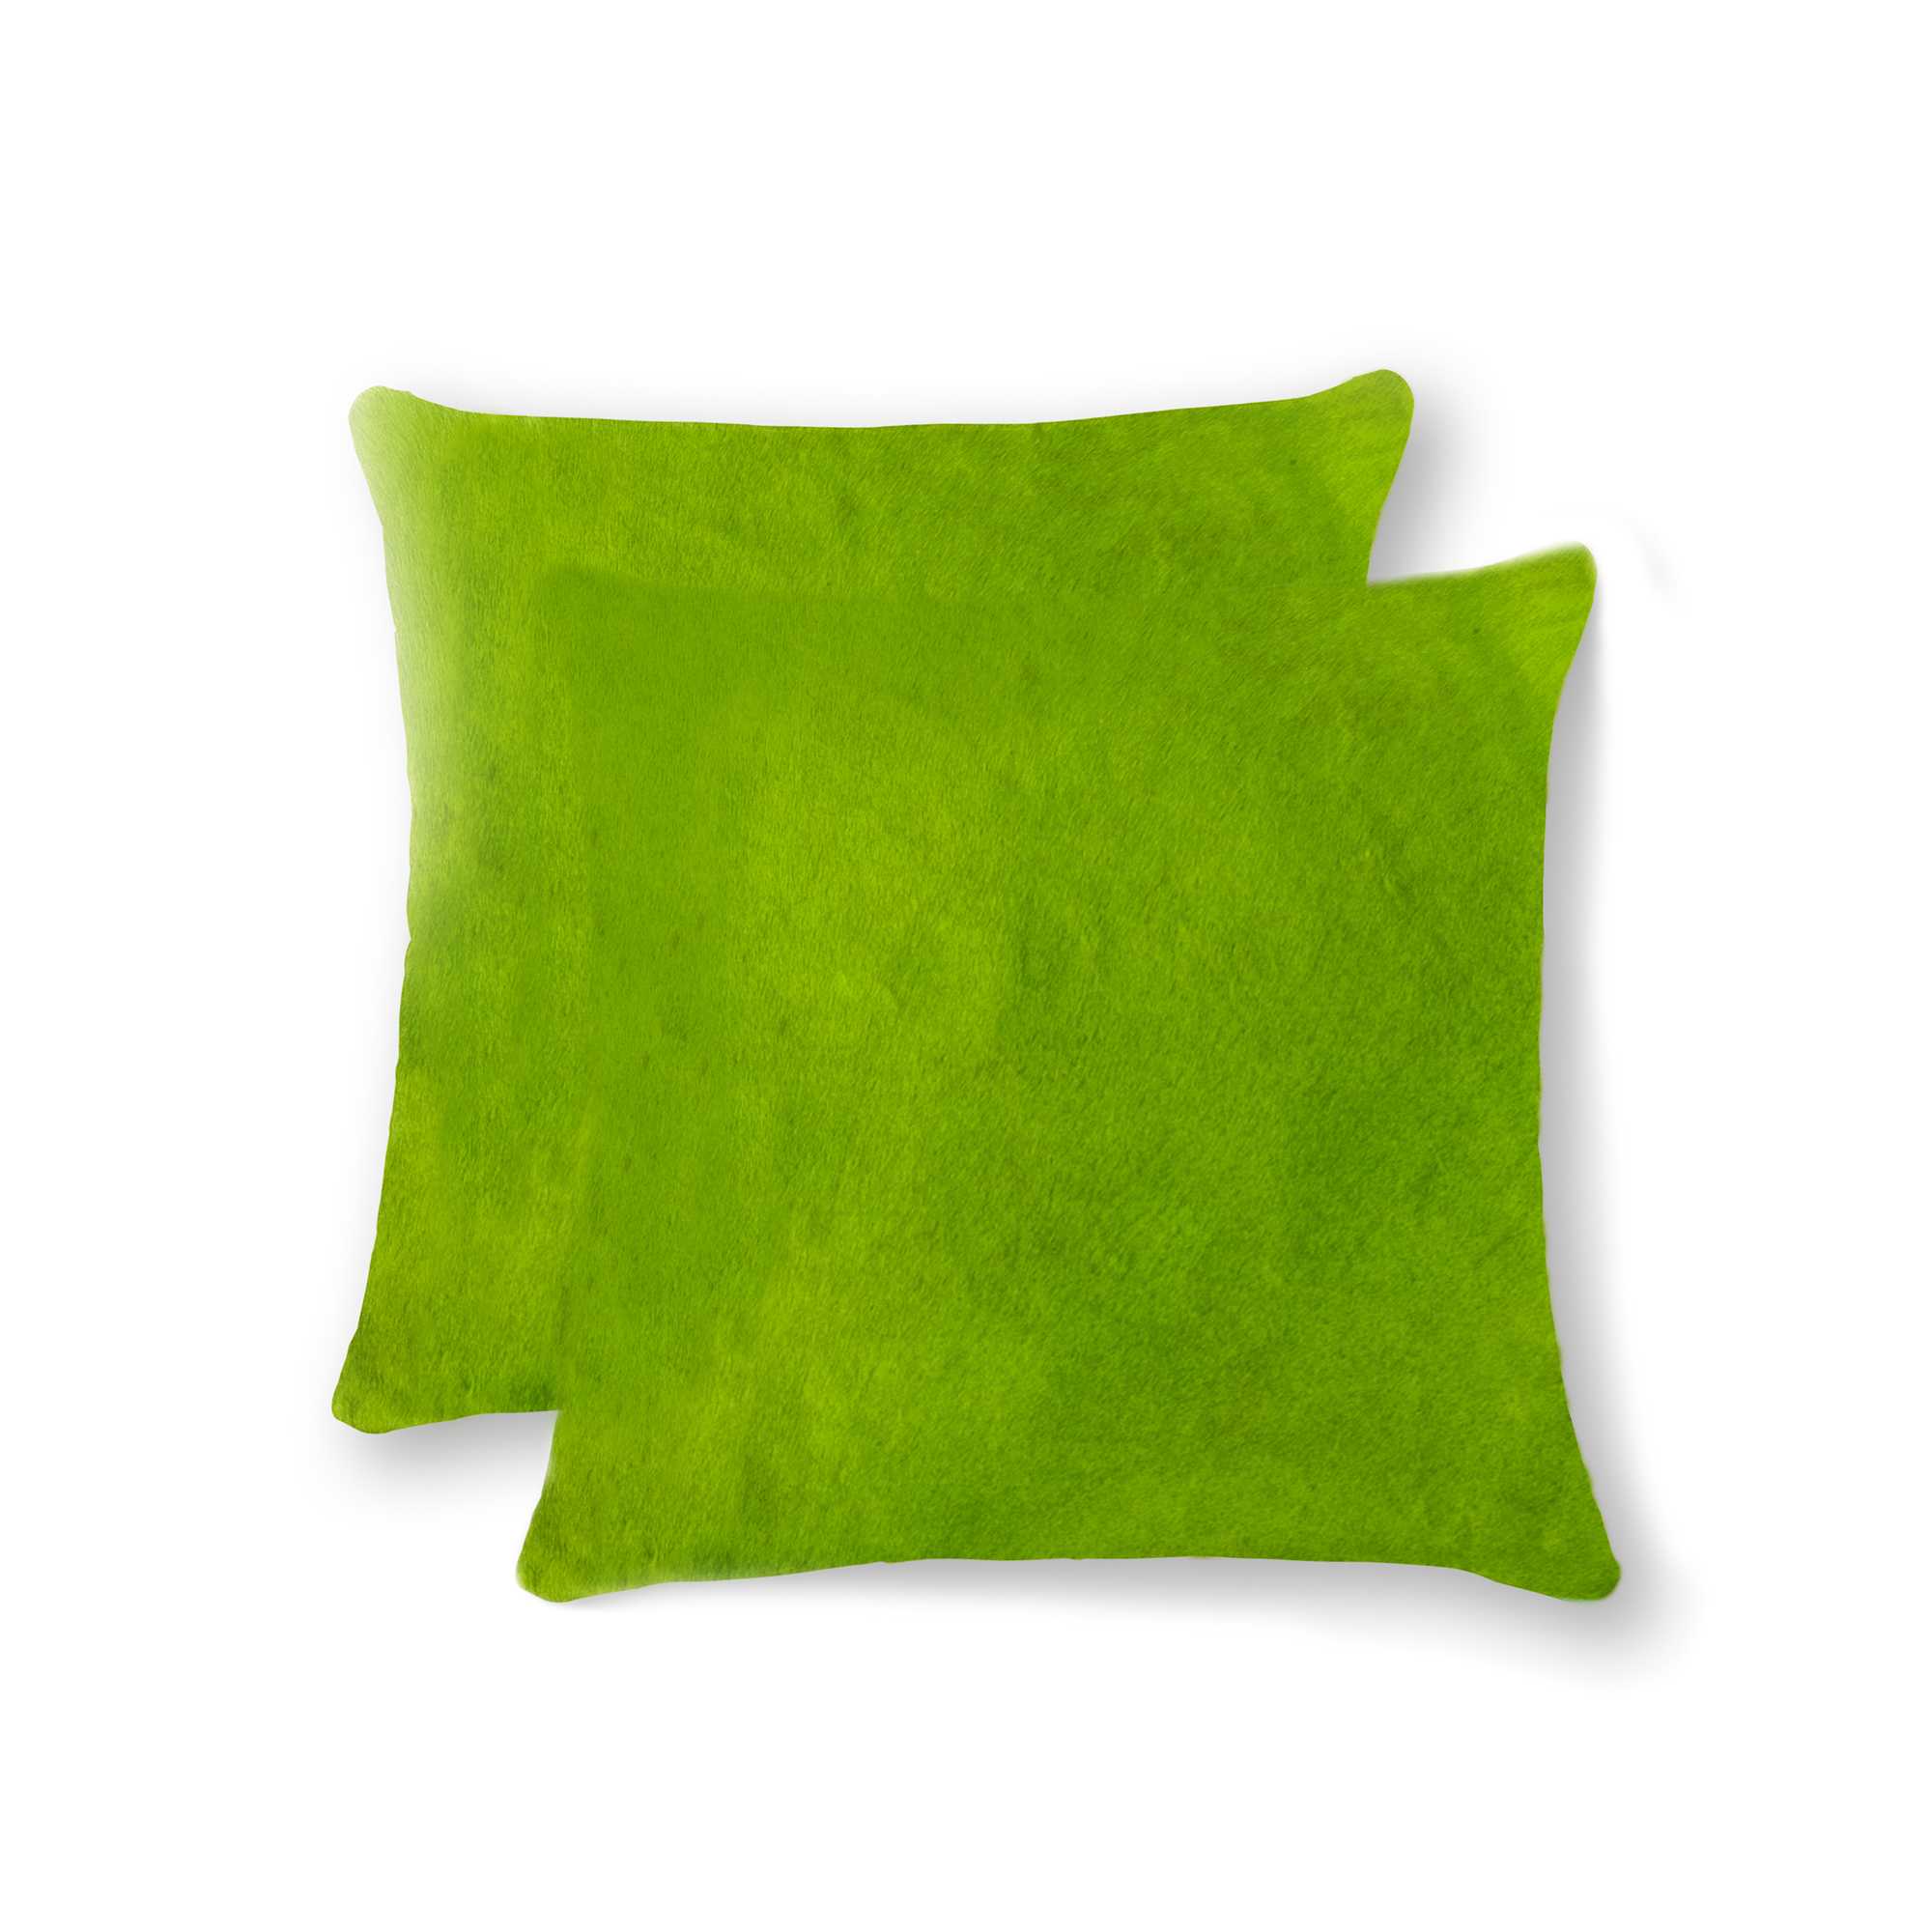 18" x 18" x 5" Lime Cowhide - Pillow 2-Pack